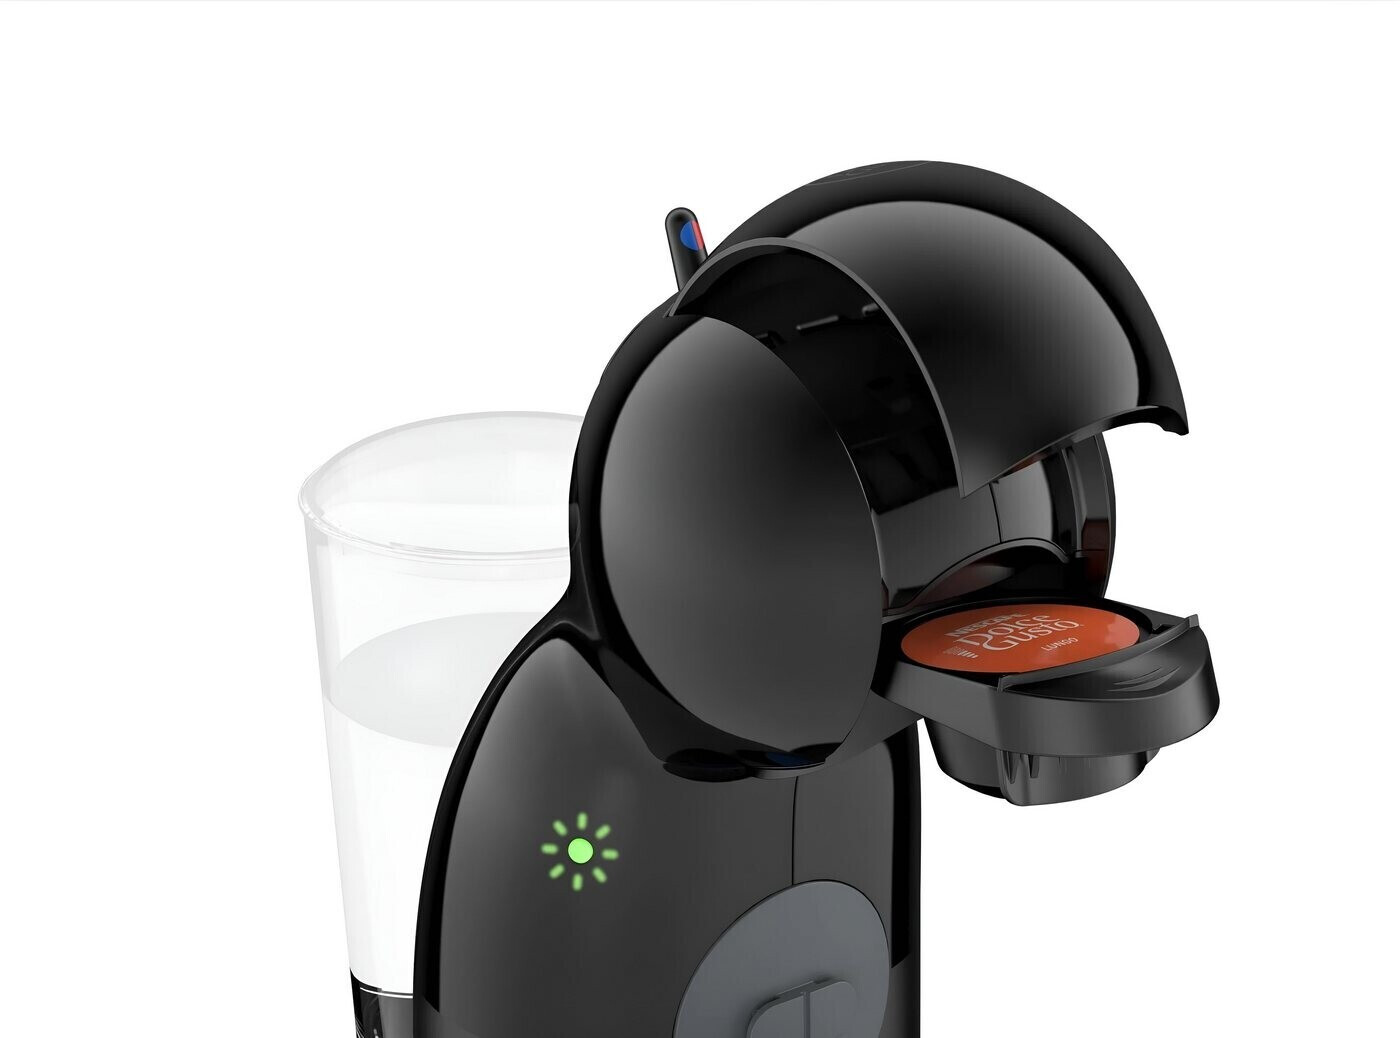 Krups Piccolo XS Cafetera Dolce Gusto Negro/Gris